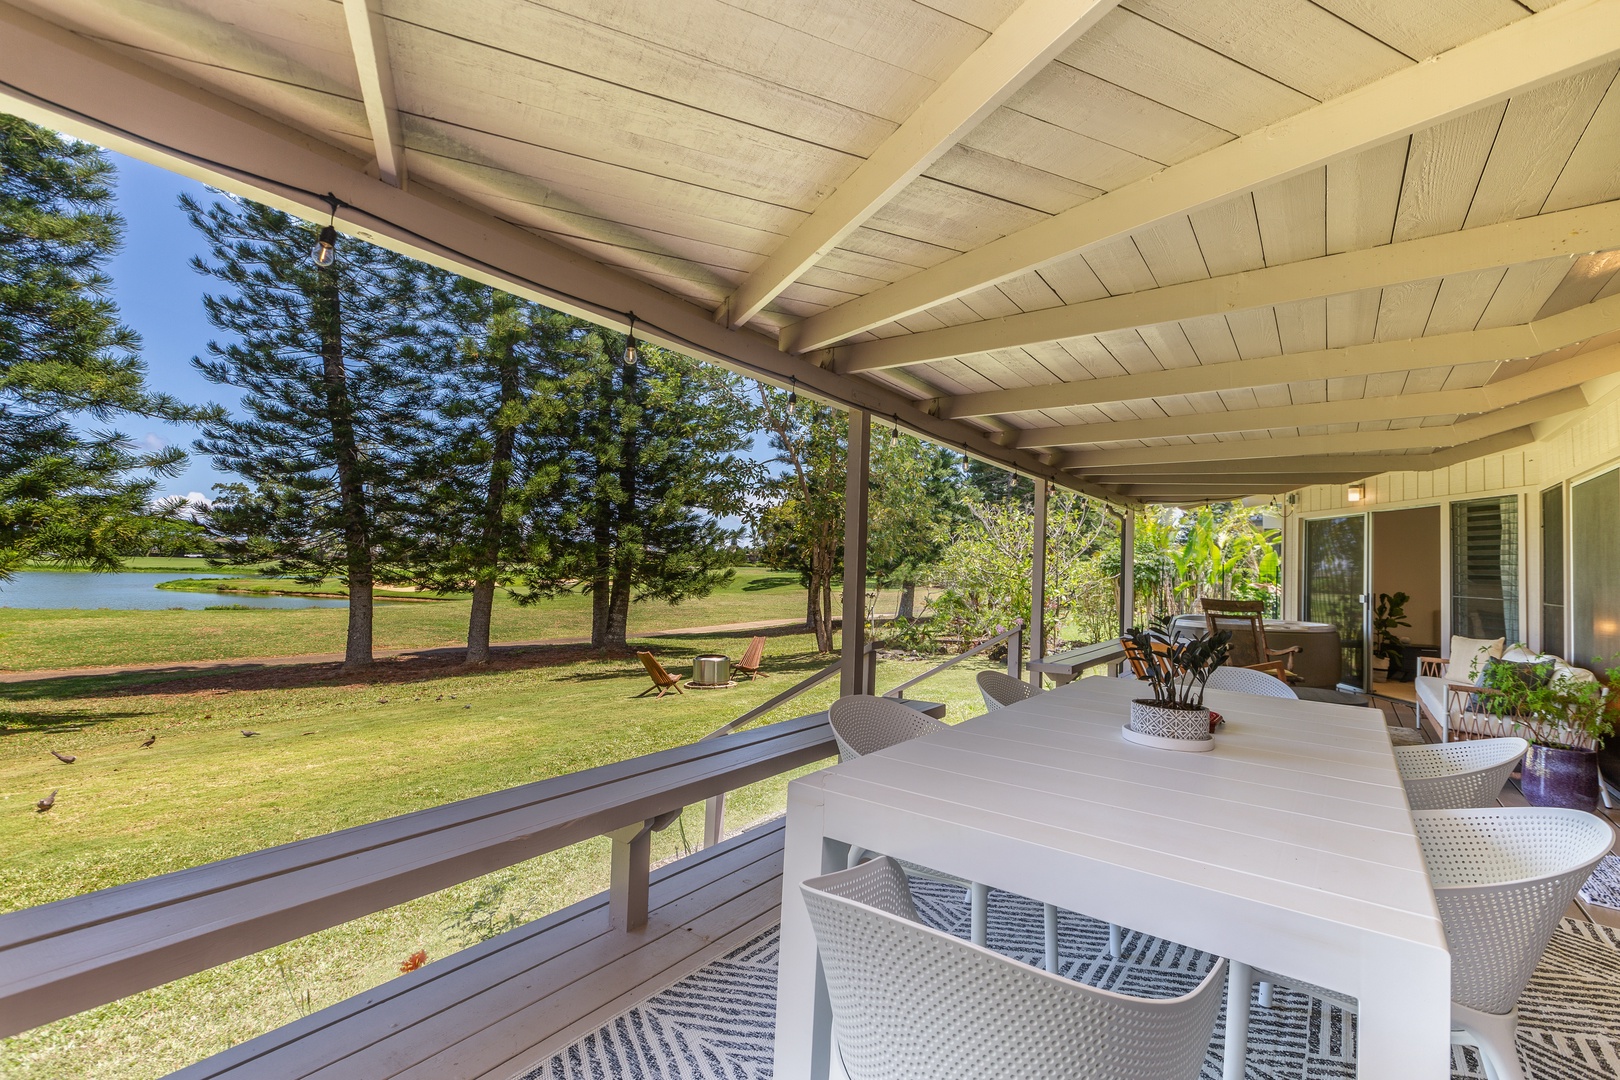 Princeville Vacation Rentals, Wai Puna - Outdoor covered area if you fancy to dine outside